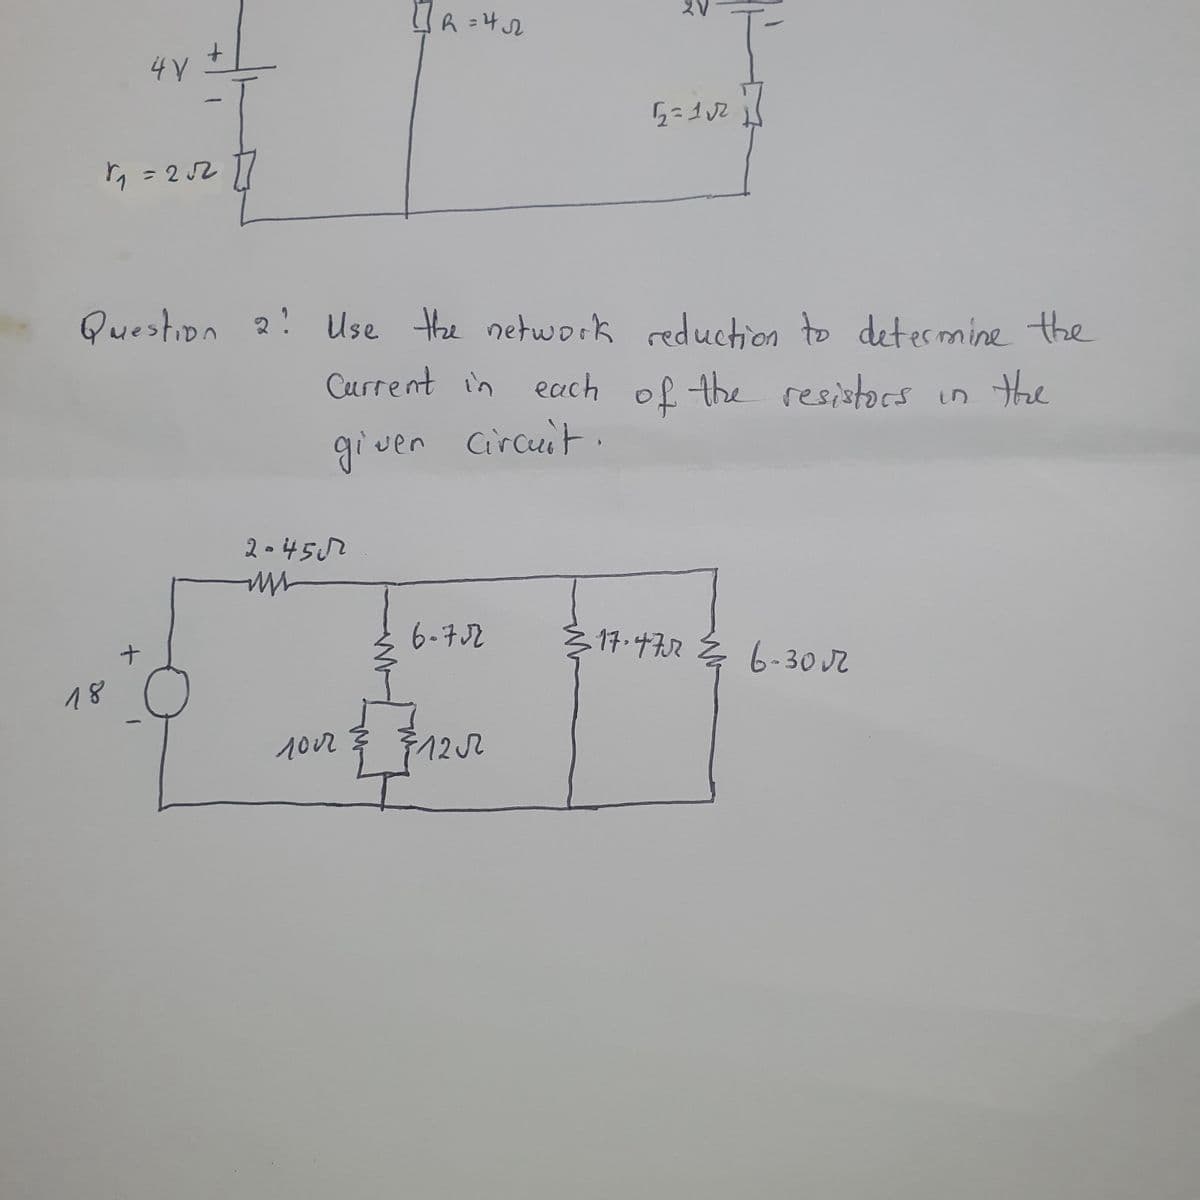 4V
-
1₁=2052 []
18
2-45
m
[] ₁ = 4√22
Question 2! Use the network reduction to determine the
Current in each of the resistors in the
giver circuit
1002
6-7√2
22=1√2
}122
+
≤17-4752 ¾ 6-302